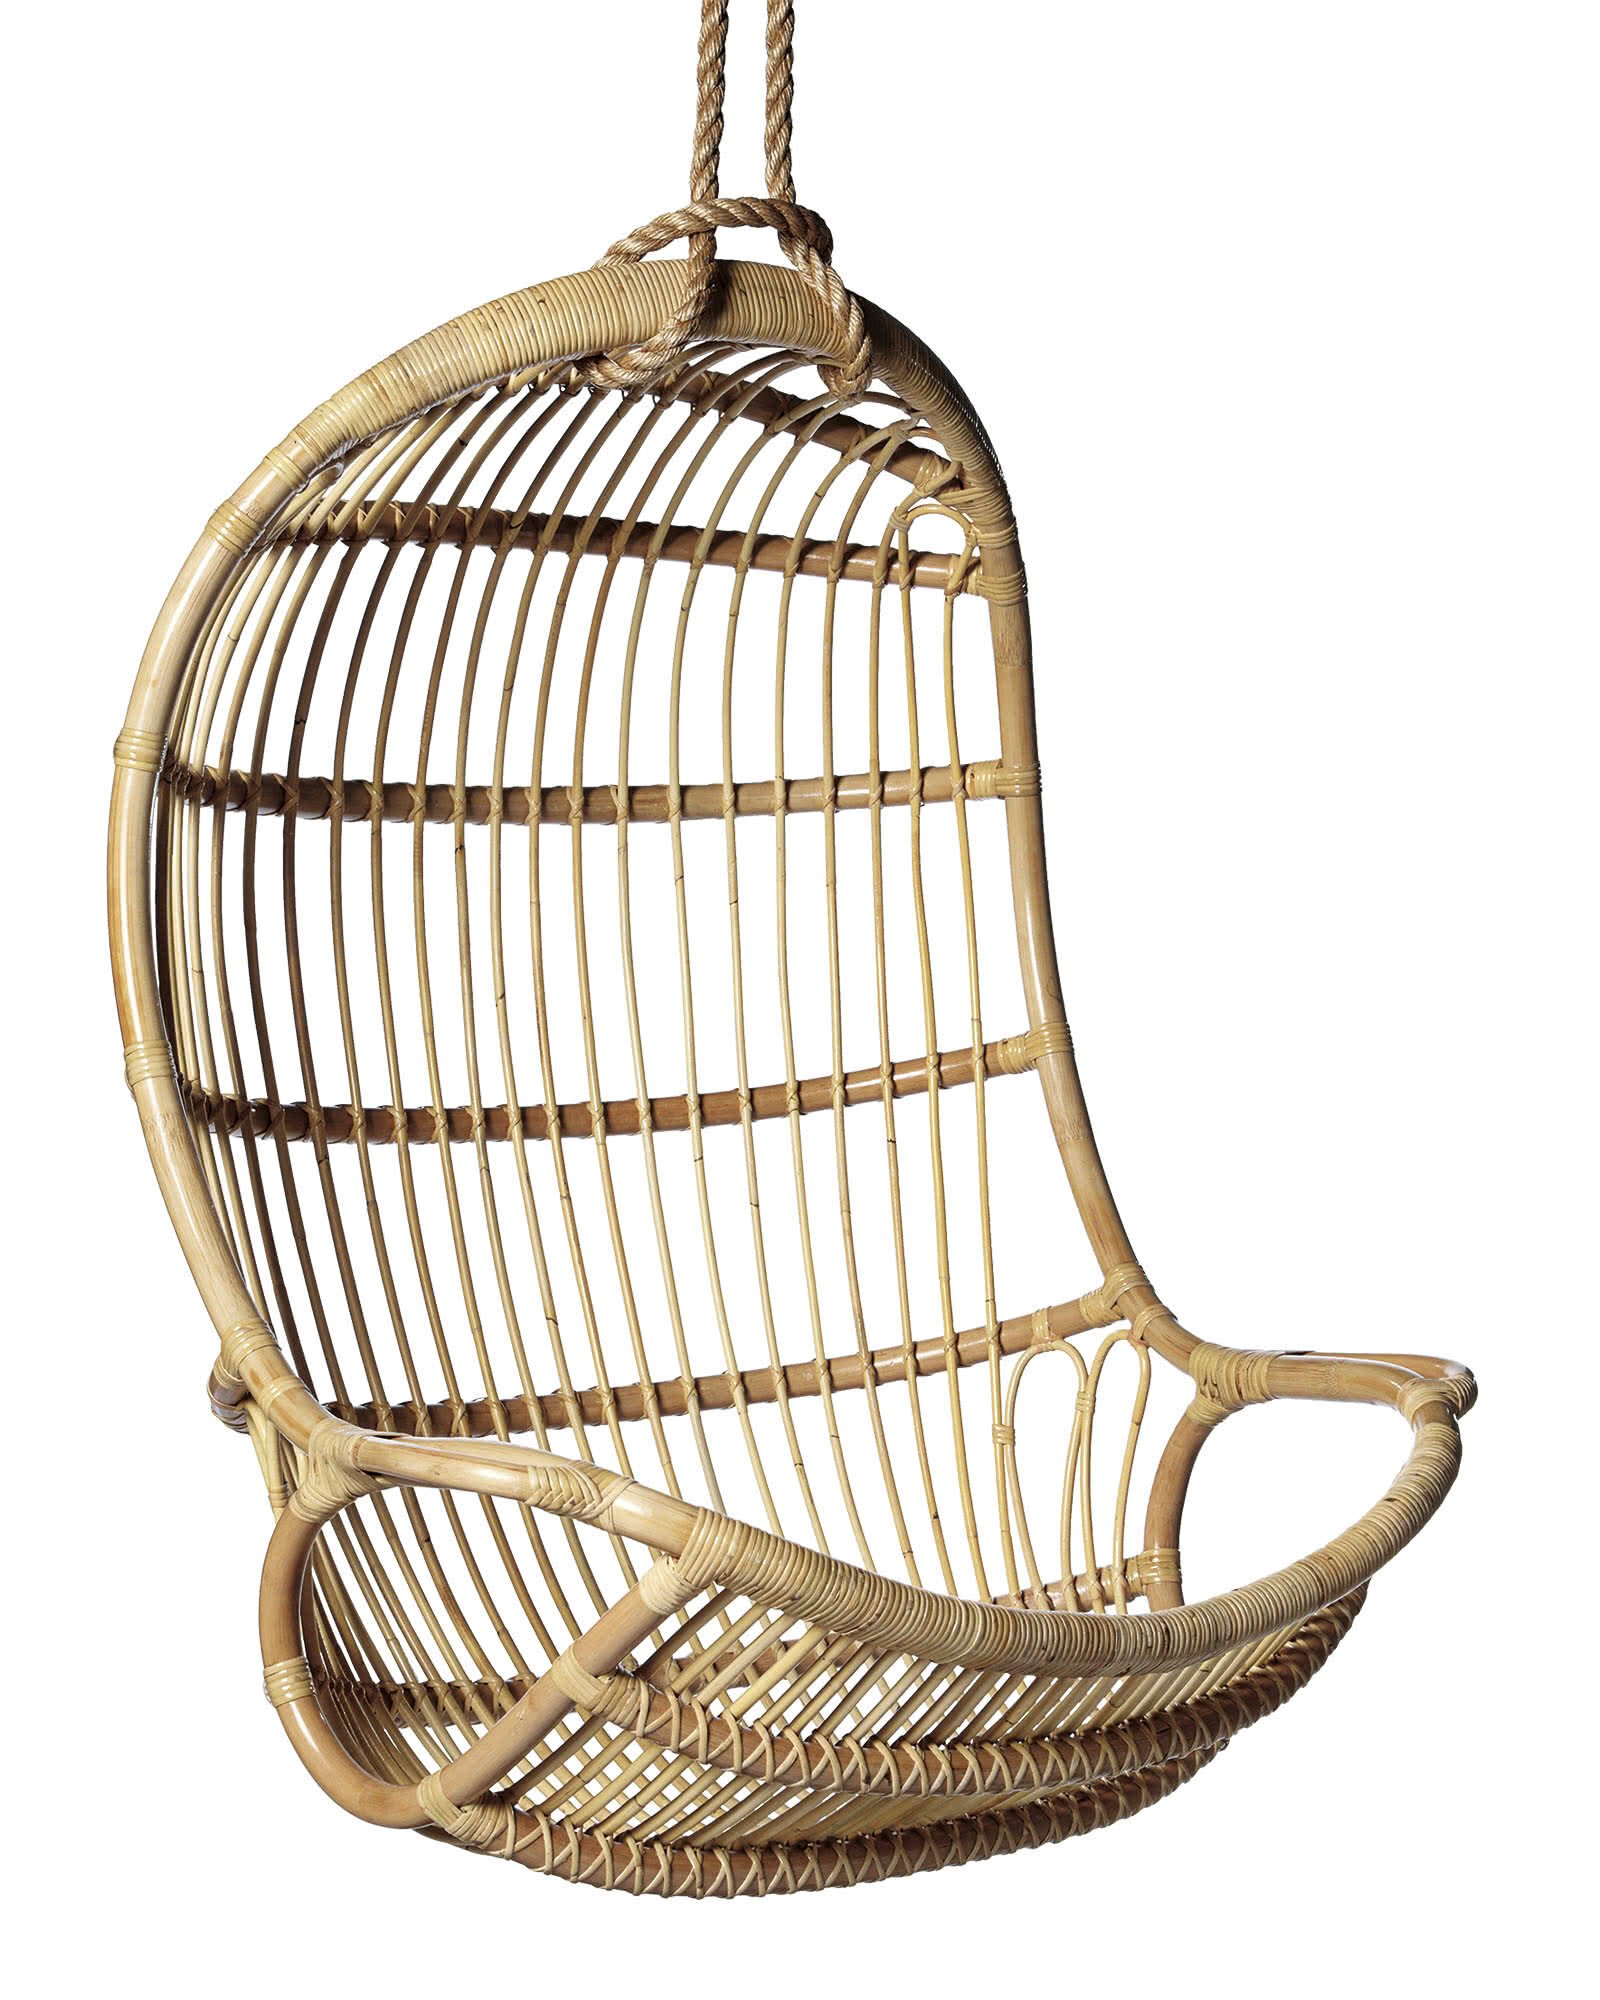 Serena+and+Lilly+Hanging+Rattan+Chair.jpg